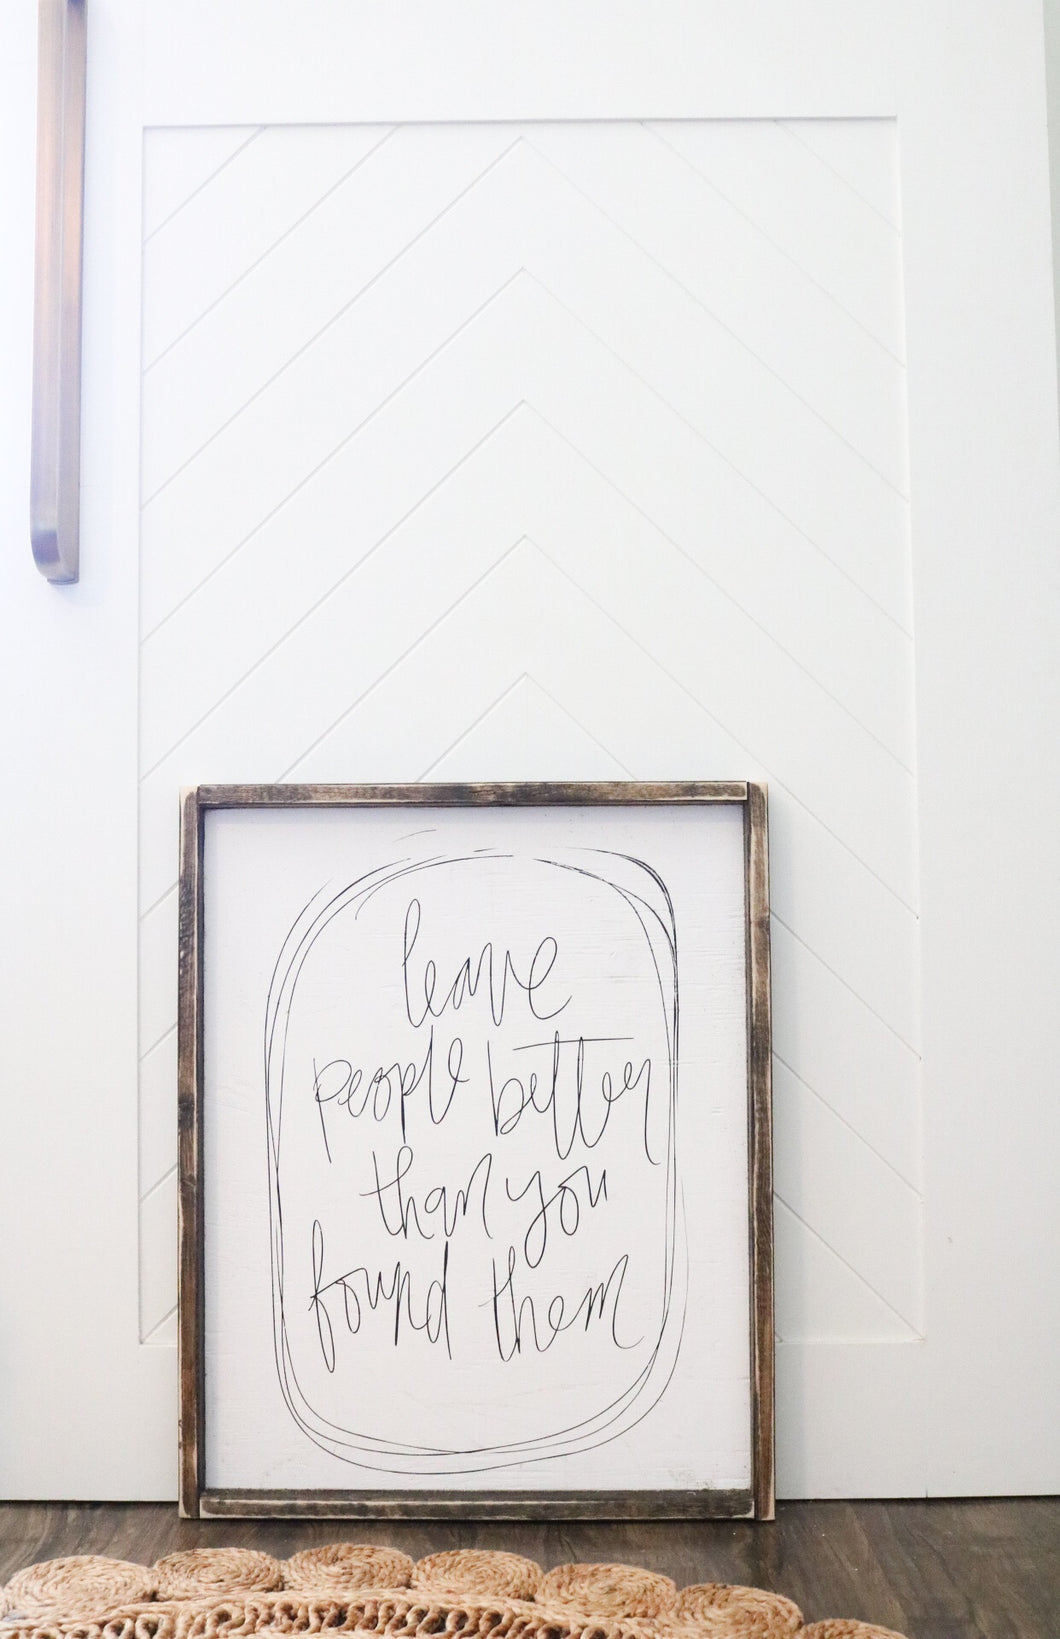 Leave People Better Than You Found Them - Wood Sign